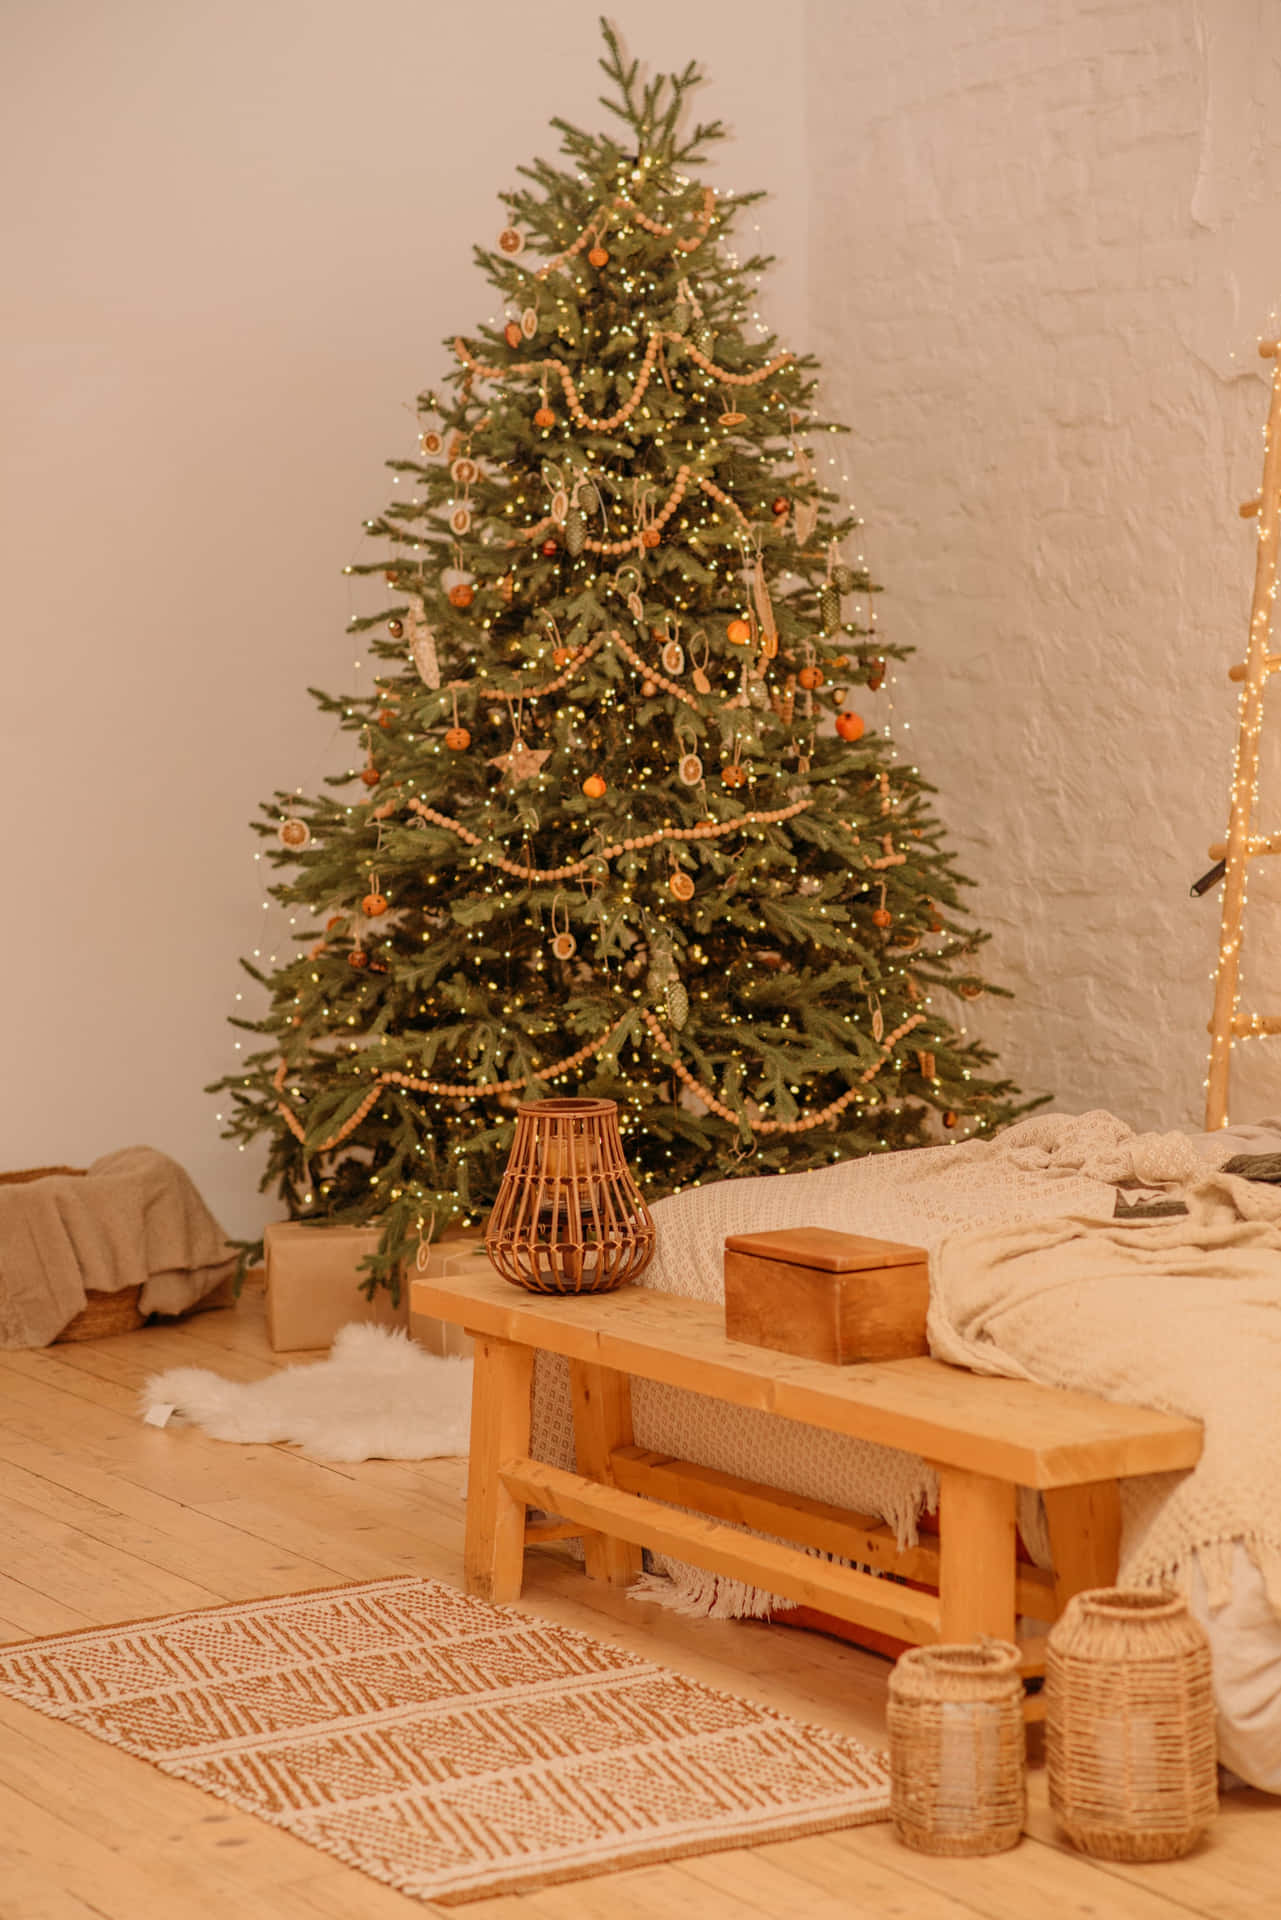 A Christmas Tree In A Room With A Bed And A Ladder